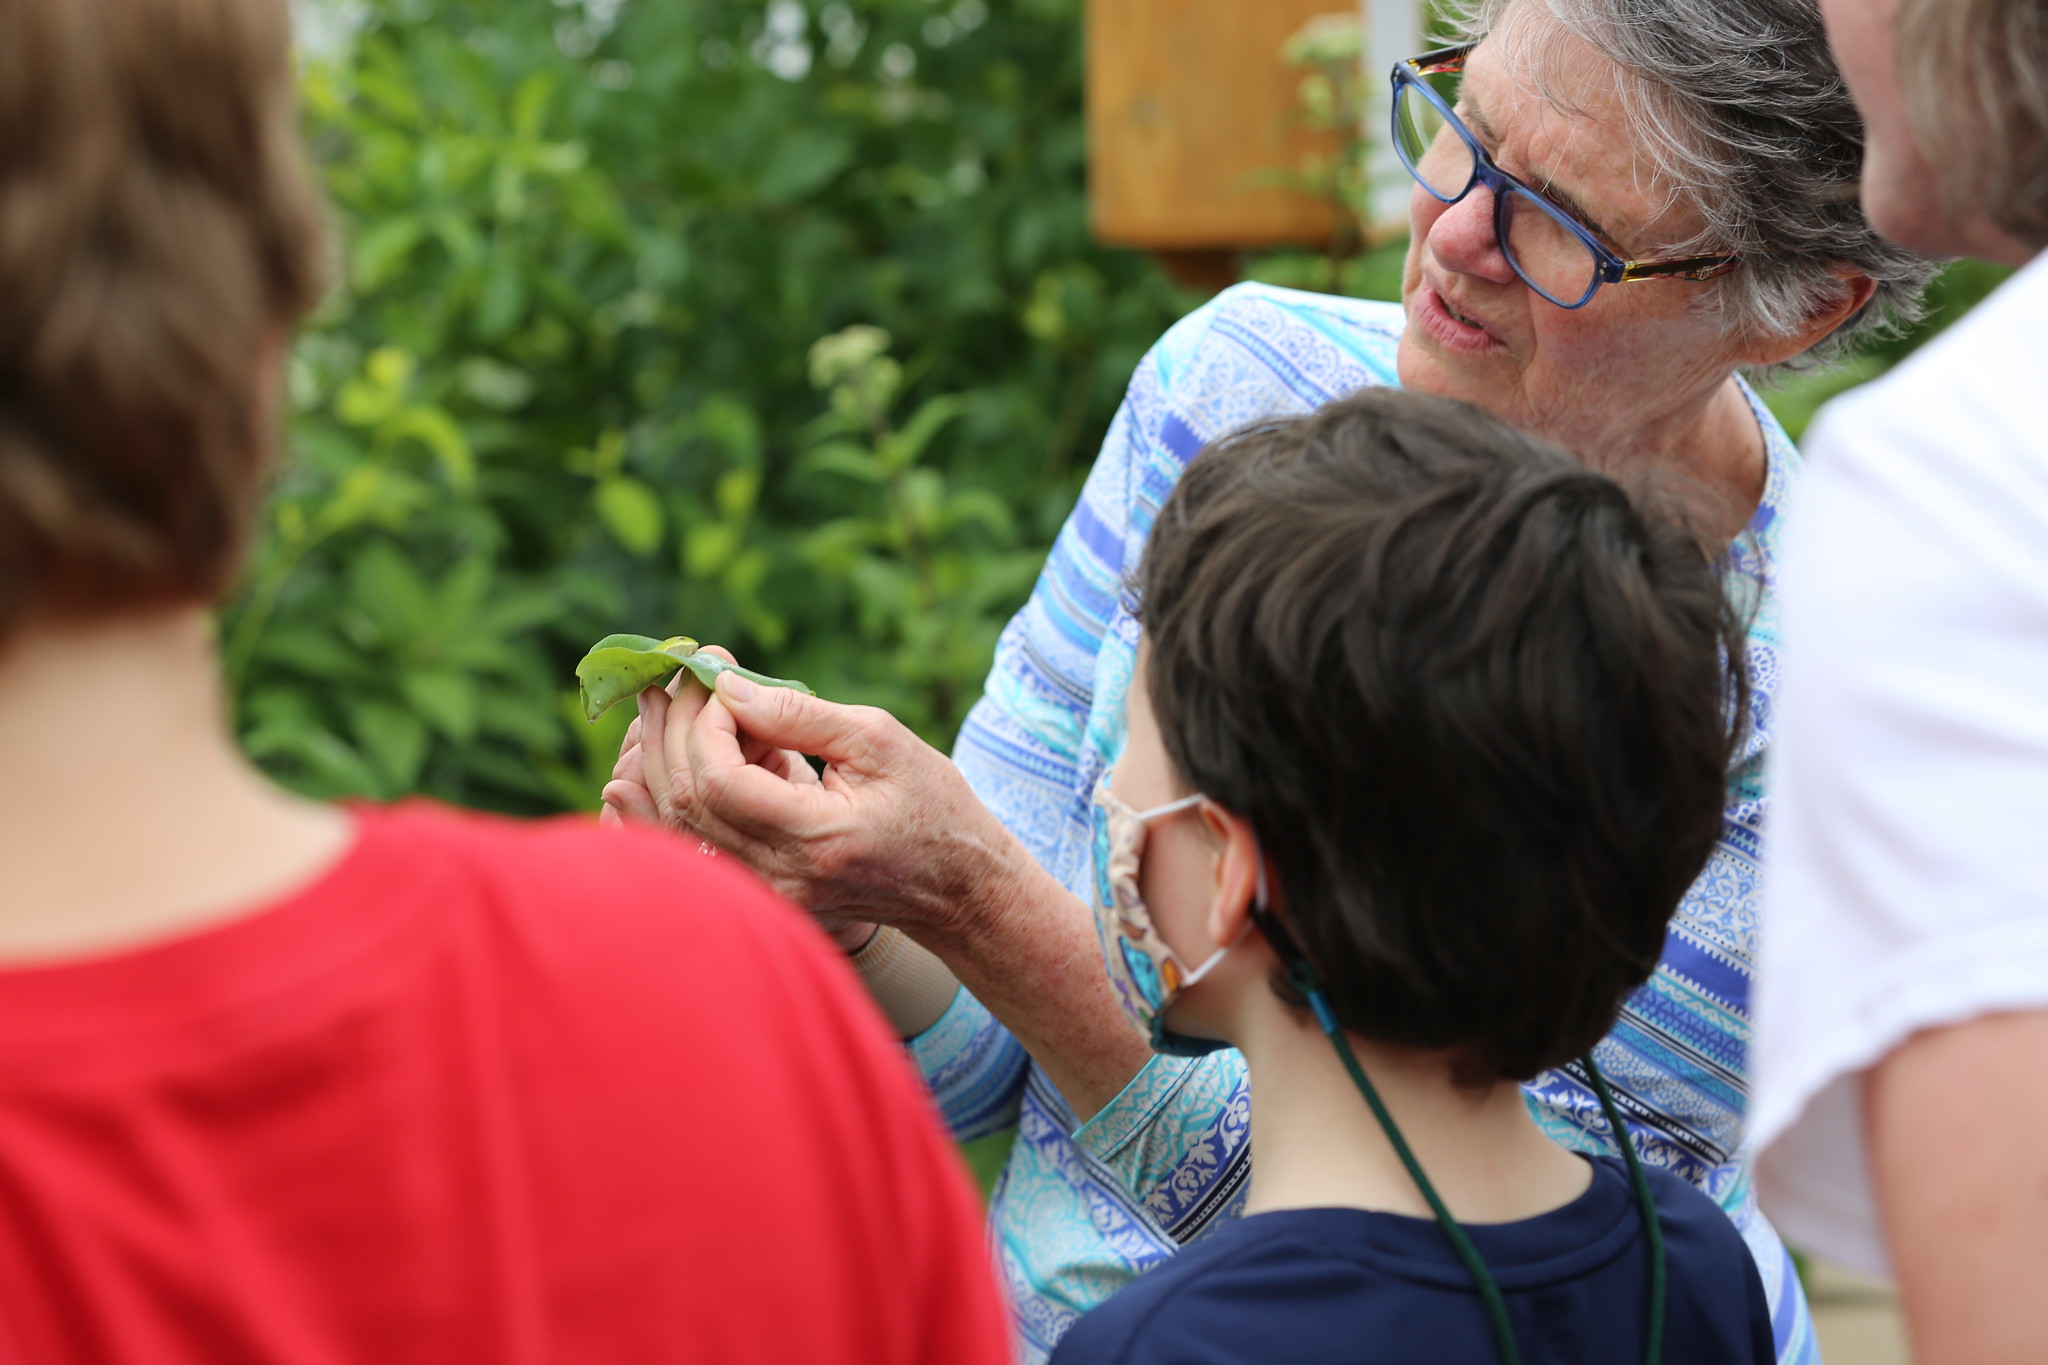 Science Night at Jefferson Farm and Garden: Help Save the Pollinators (click to read)